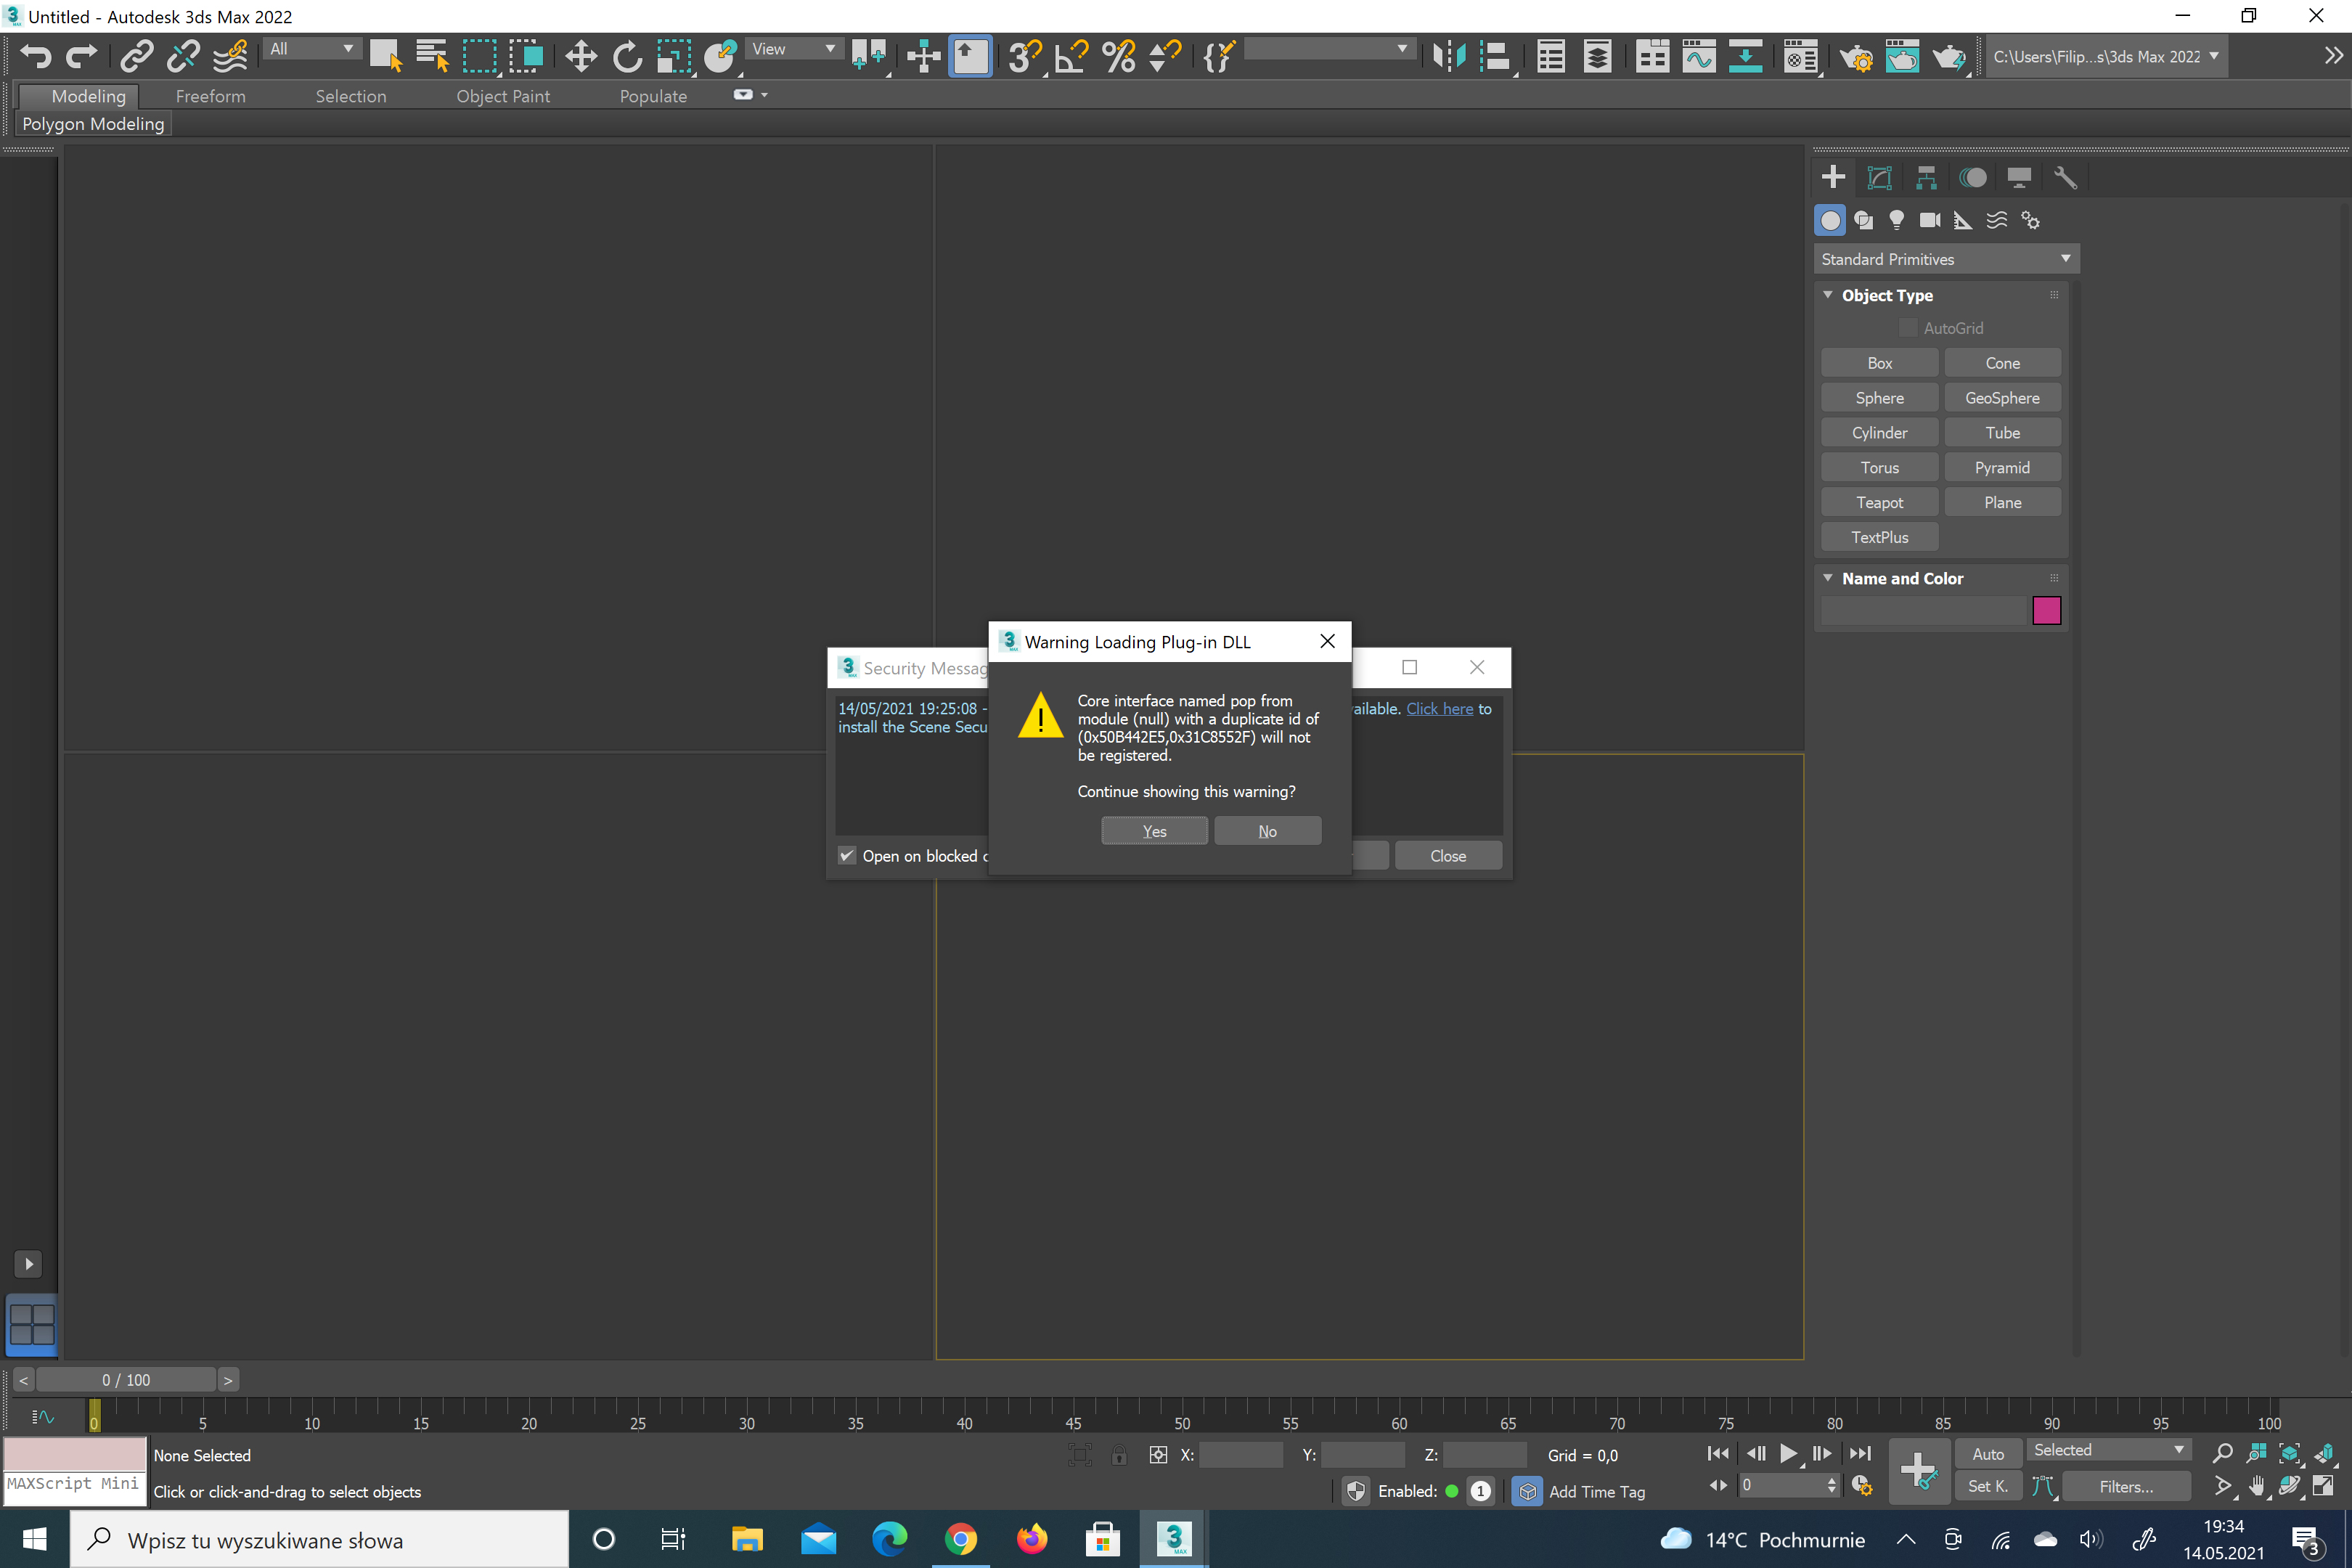 Help: Warning Loading Plug-in DLL - Autodesk Community - 3ds Max